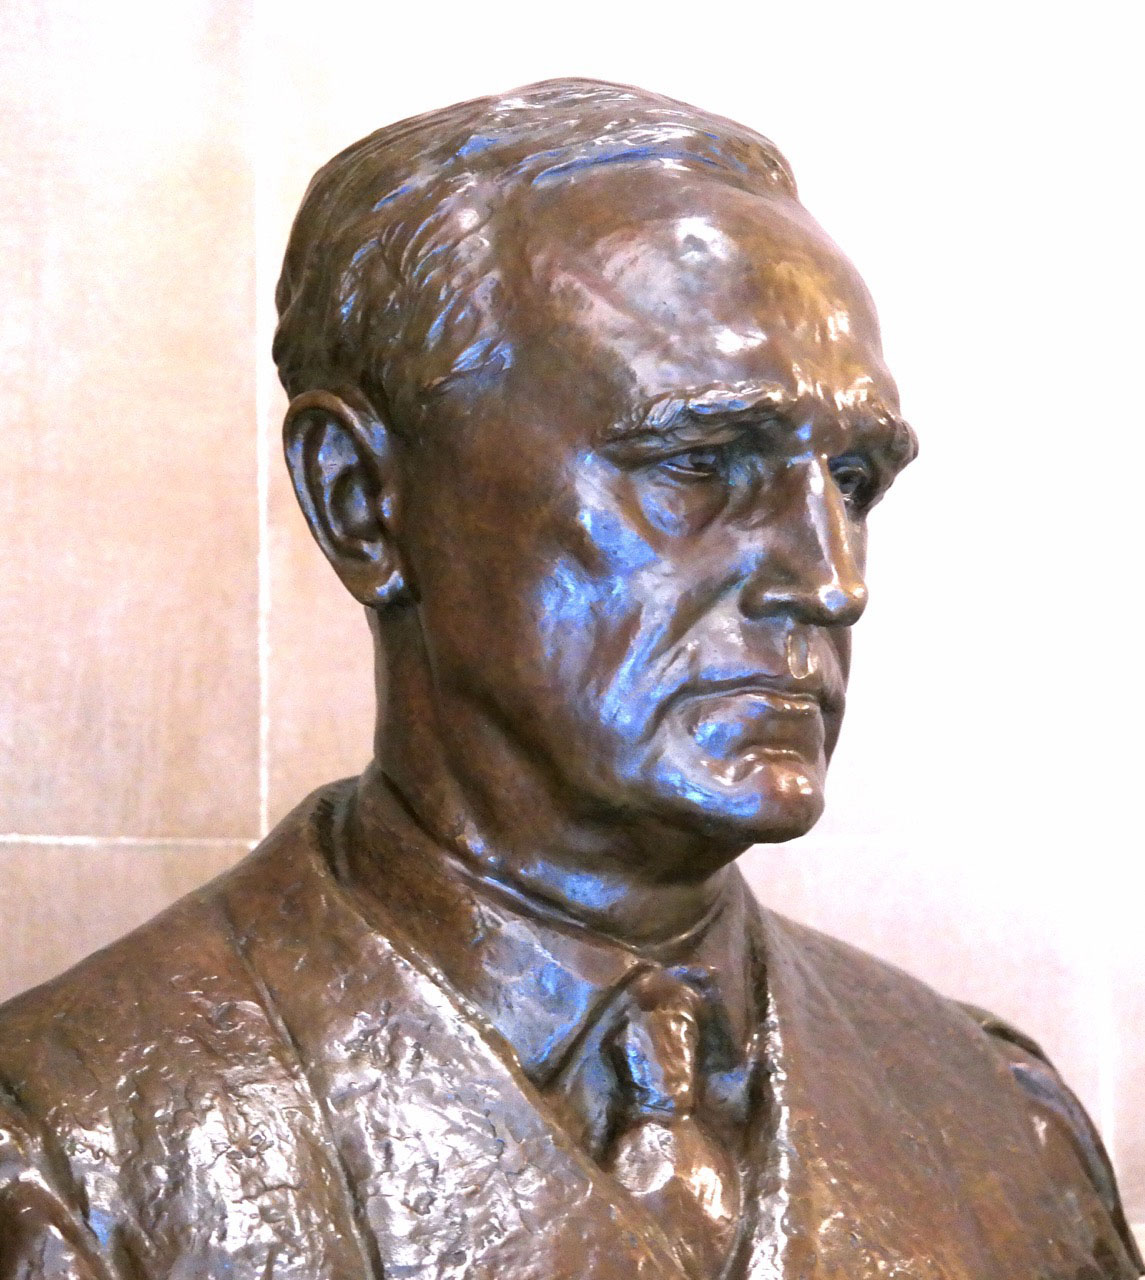 Shortly after Justice Minton’s retirement from the Supreme Court in 1956, Gov. George N. Craig commissioned his bust to be placed on display at the Statehouse, 200 W. Washington Street, Indianapolis. Photo by Laura Harris.